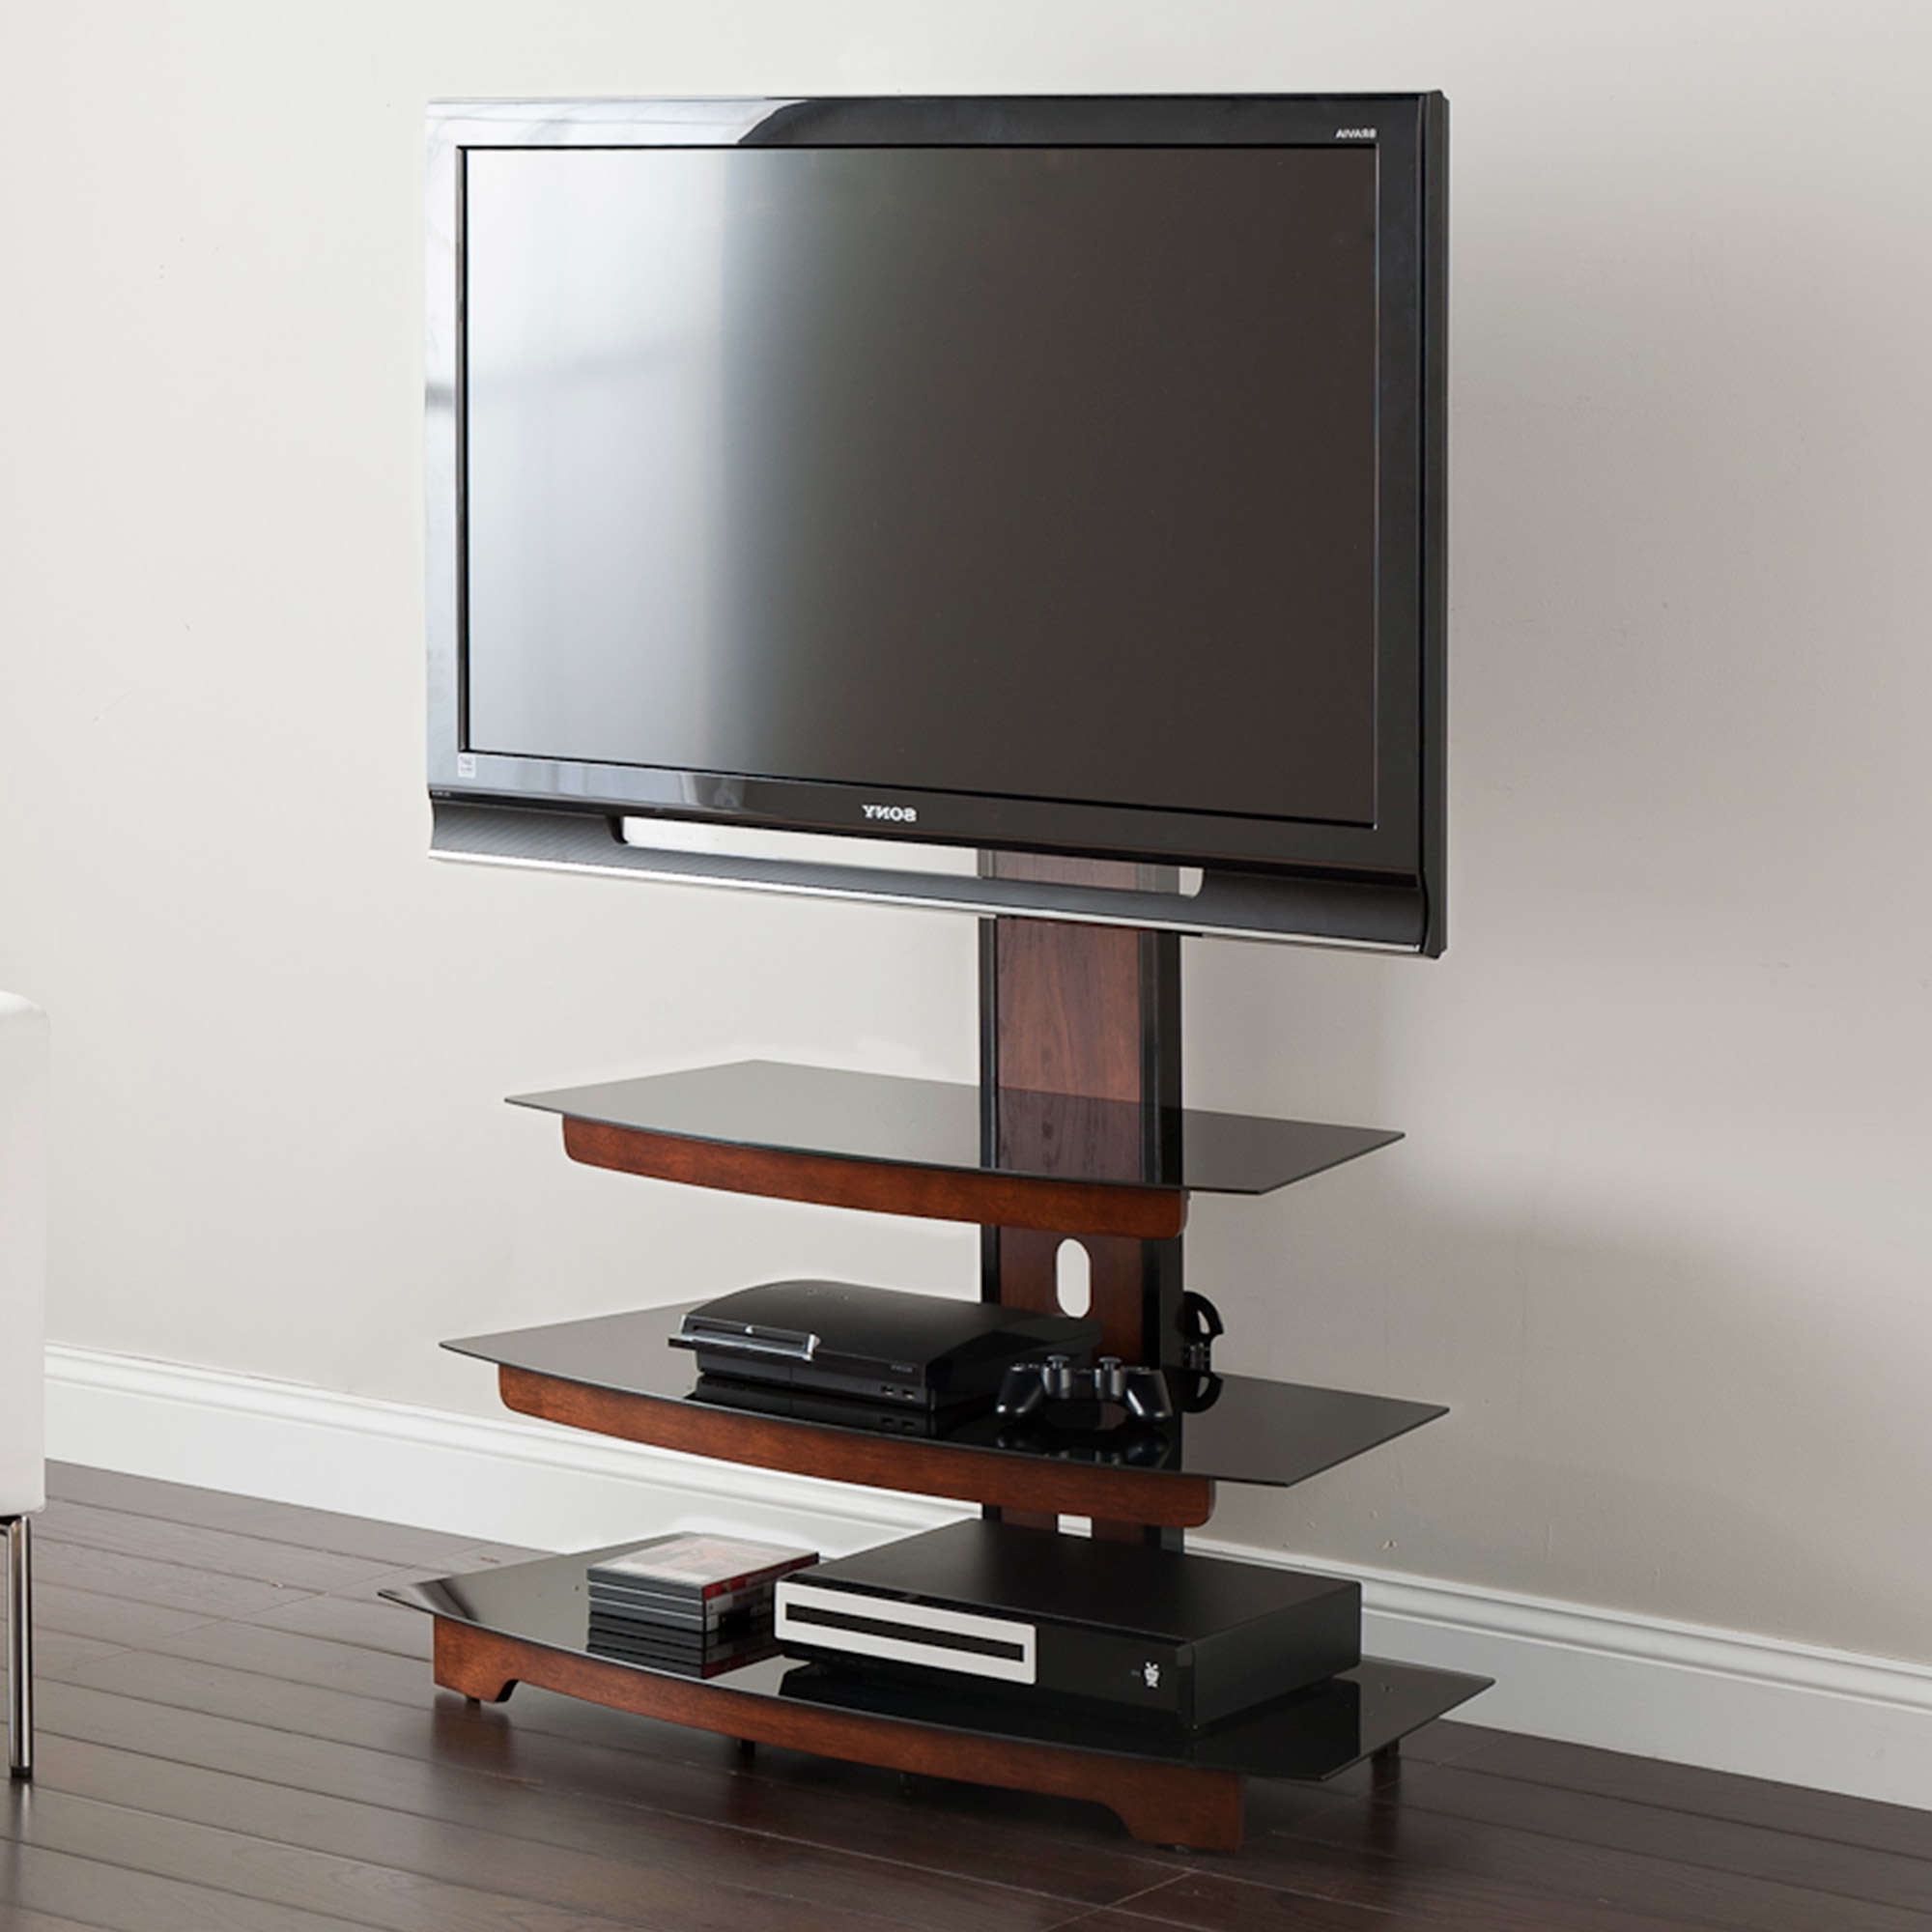 Whalen 3 Tier Television Stand For Tvs Up To 50", Perfect For Flat Screens,  Black Metal With Wood Trim Accent – Walmart With Regard To Tier Stands For Tvs (Gallery 7 of 20)